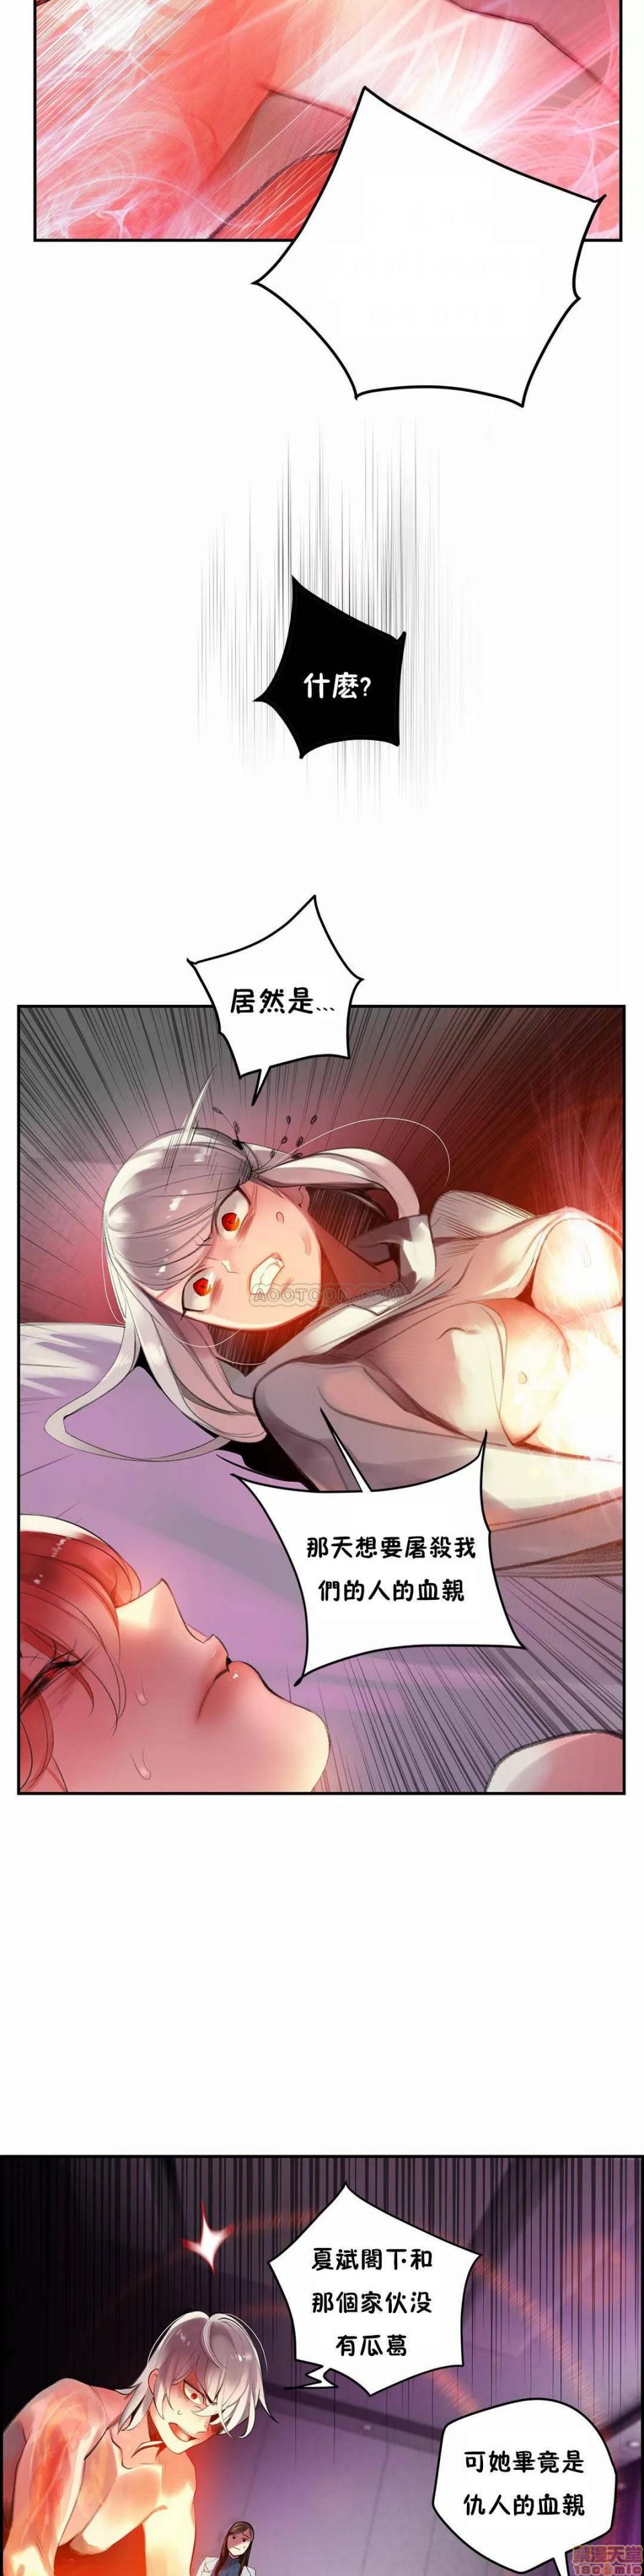 [Juder] Lilith`s Cord (第二季) Ch.77-93 end [Chinese] 38